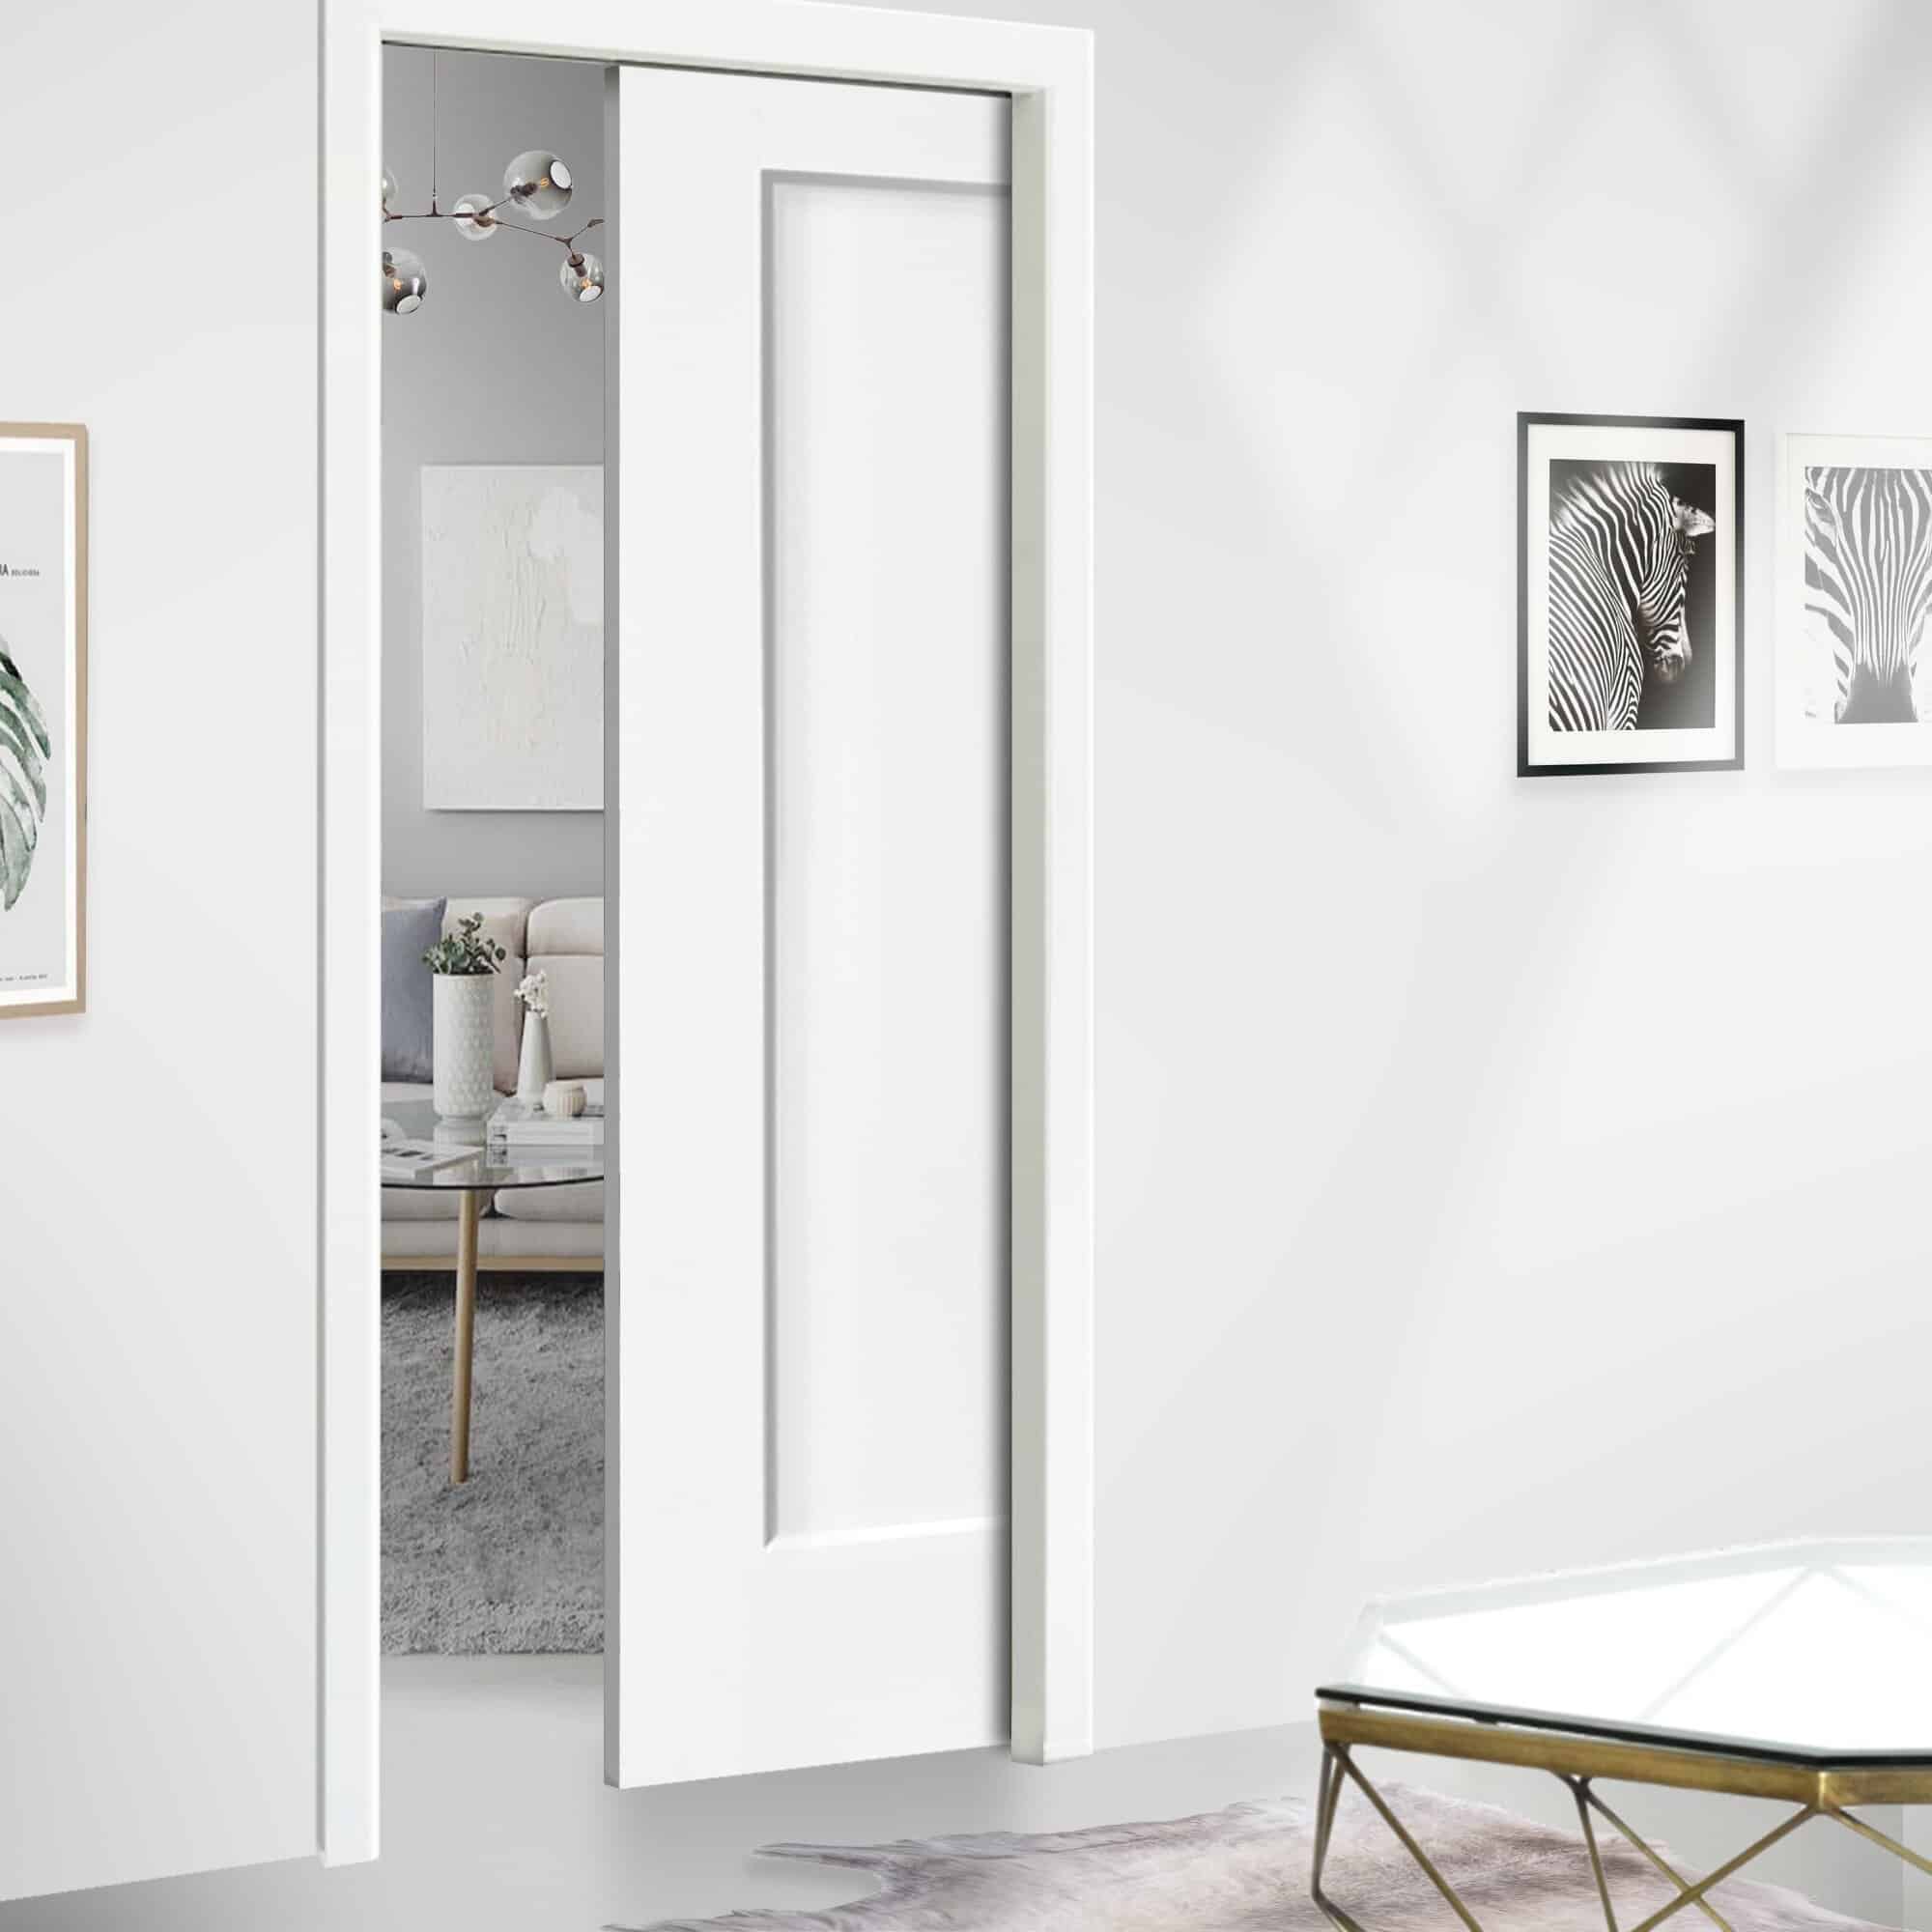 Pocket Doors Are A Great Space-Saving Option